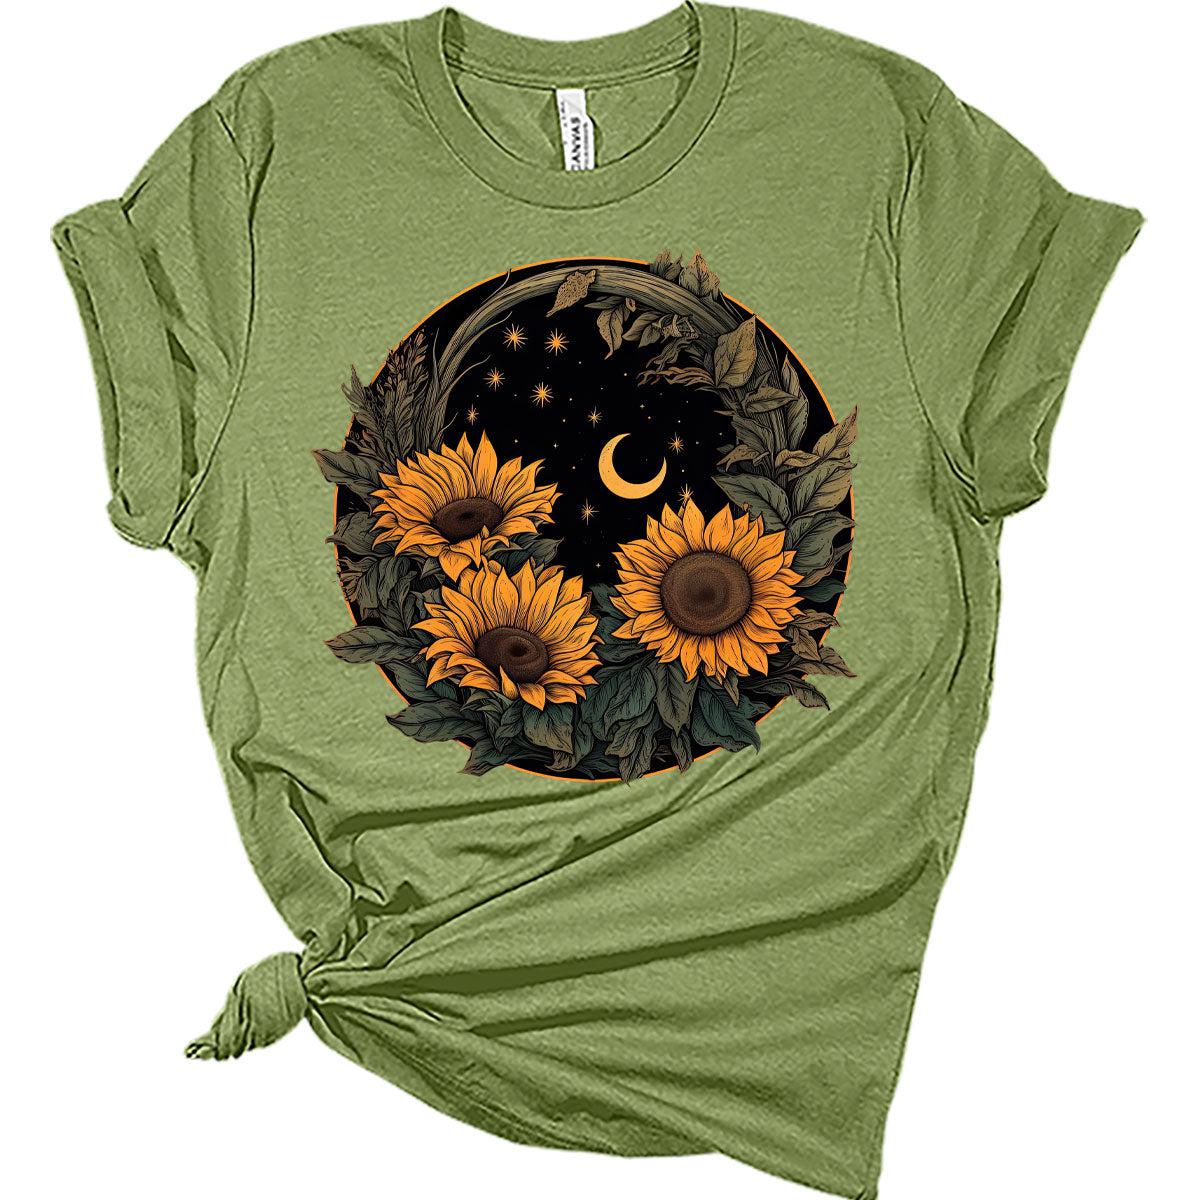 Womens Floral Shirts Trendy Wildflower Graphic Tees Spring Short Sleeve Sunflower T Shirts Plus Size Summer Tops